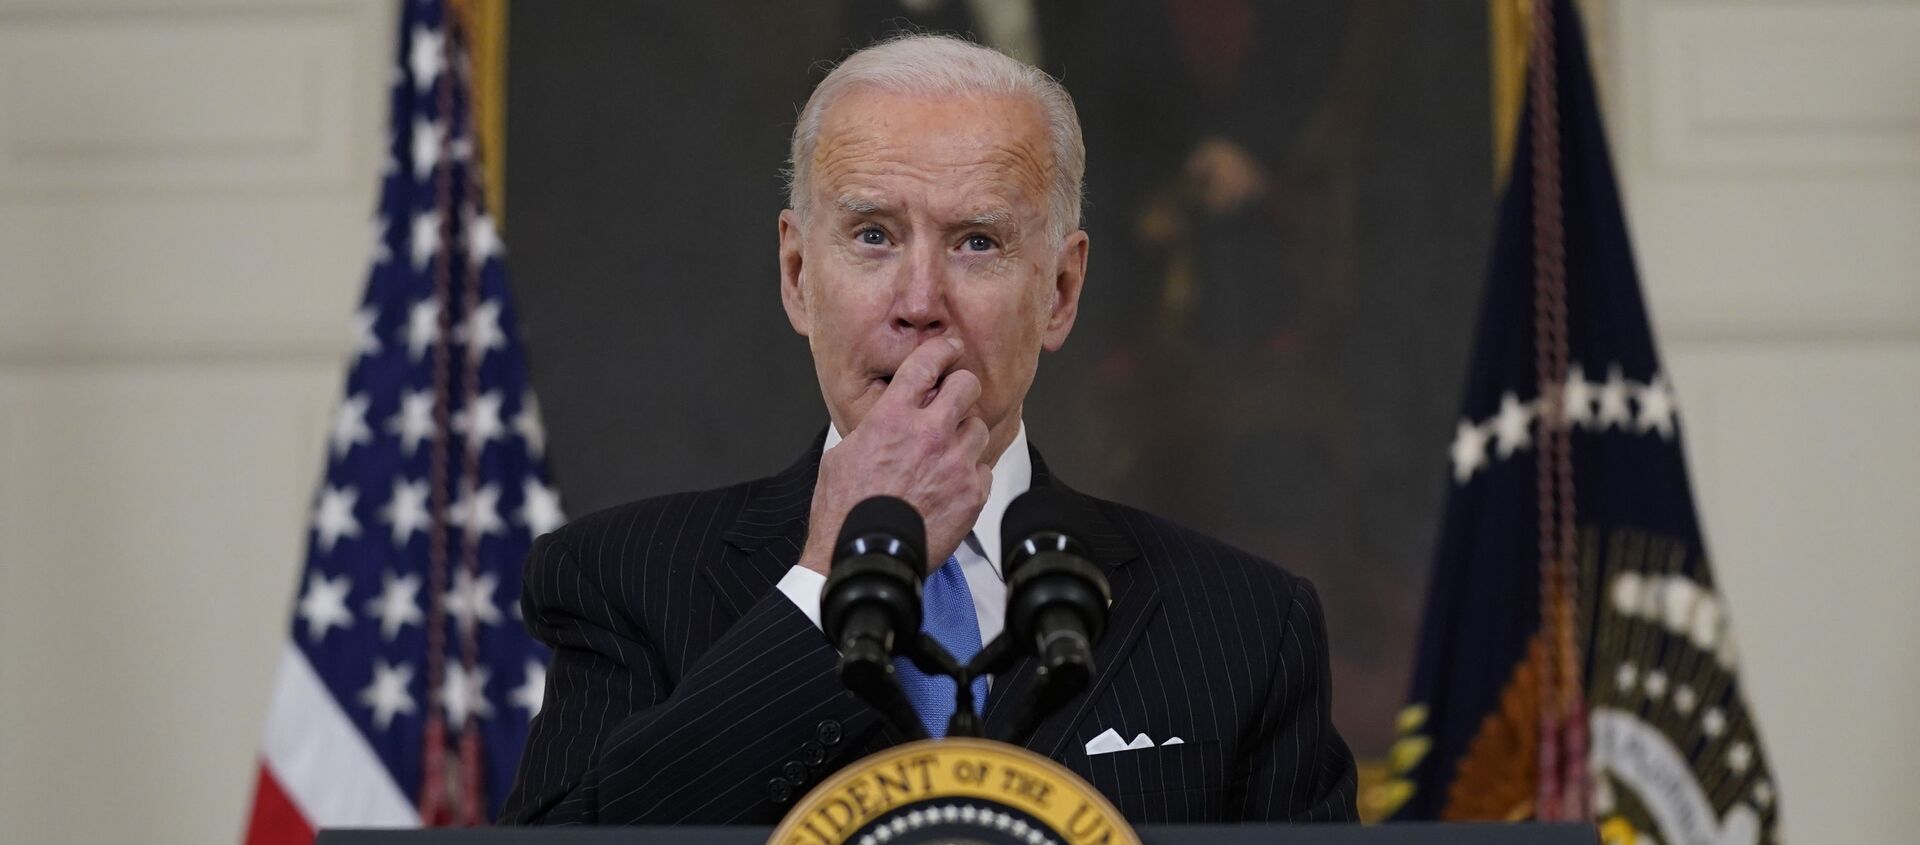 President Joe Biden speaks about efforts to combat COVID-19, in the State Dining Room of the White House, Tuesday, March 2, 2021, in Washington - Sputnik International, 1920, 18.03.2021